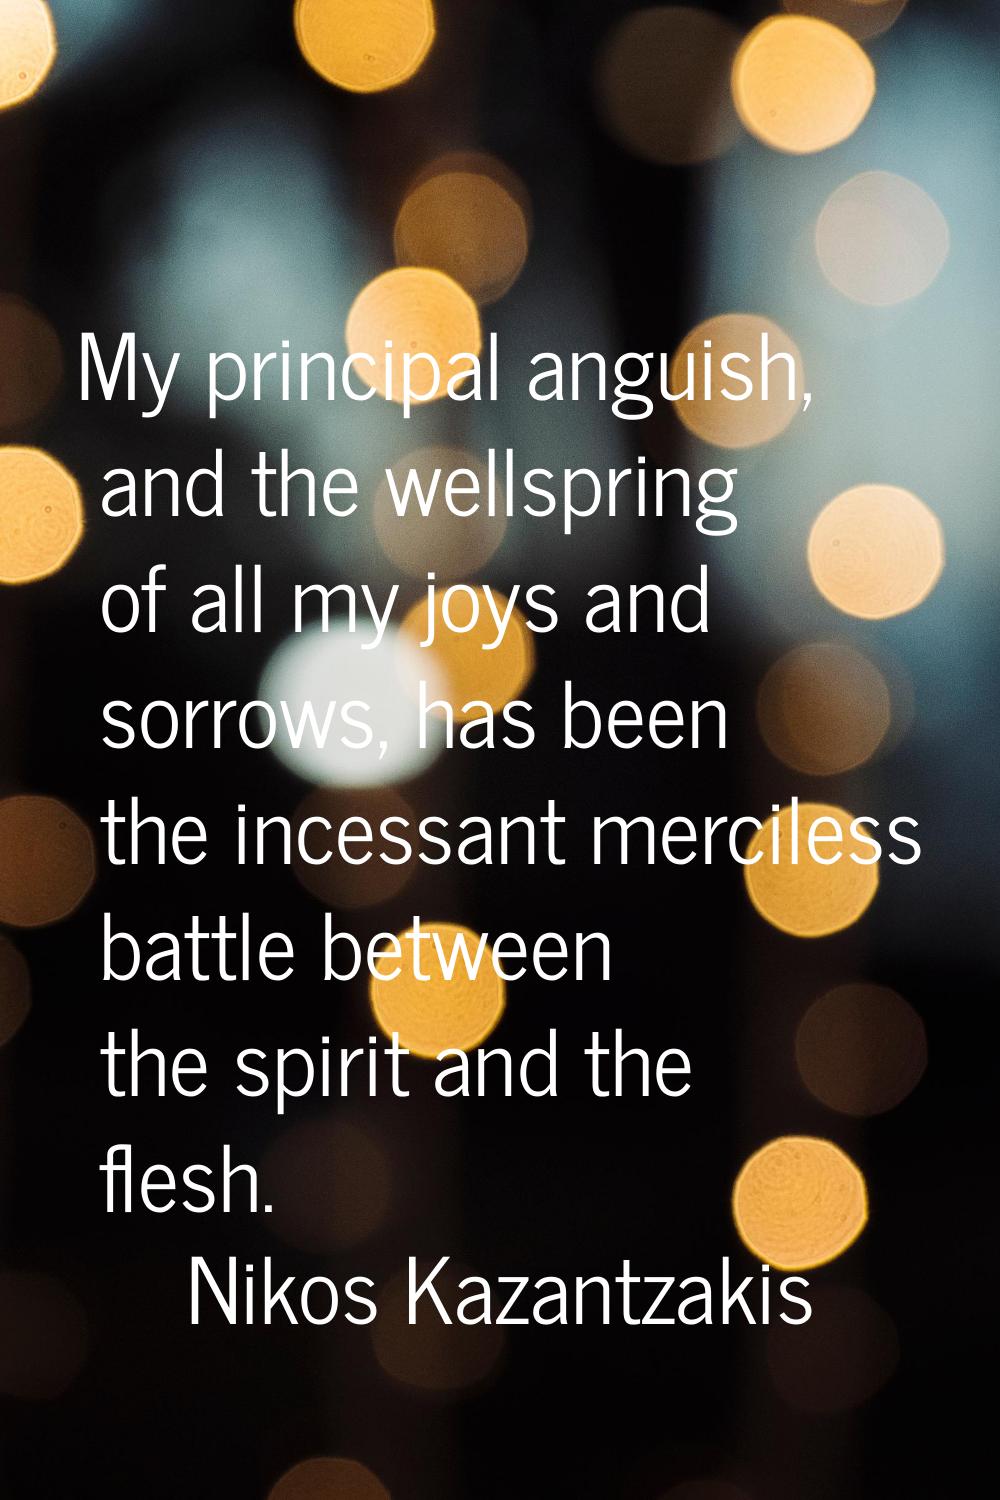 My principal anguish, and the wellspring of all my joys and sorrows, has been the incessant mercile